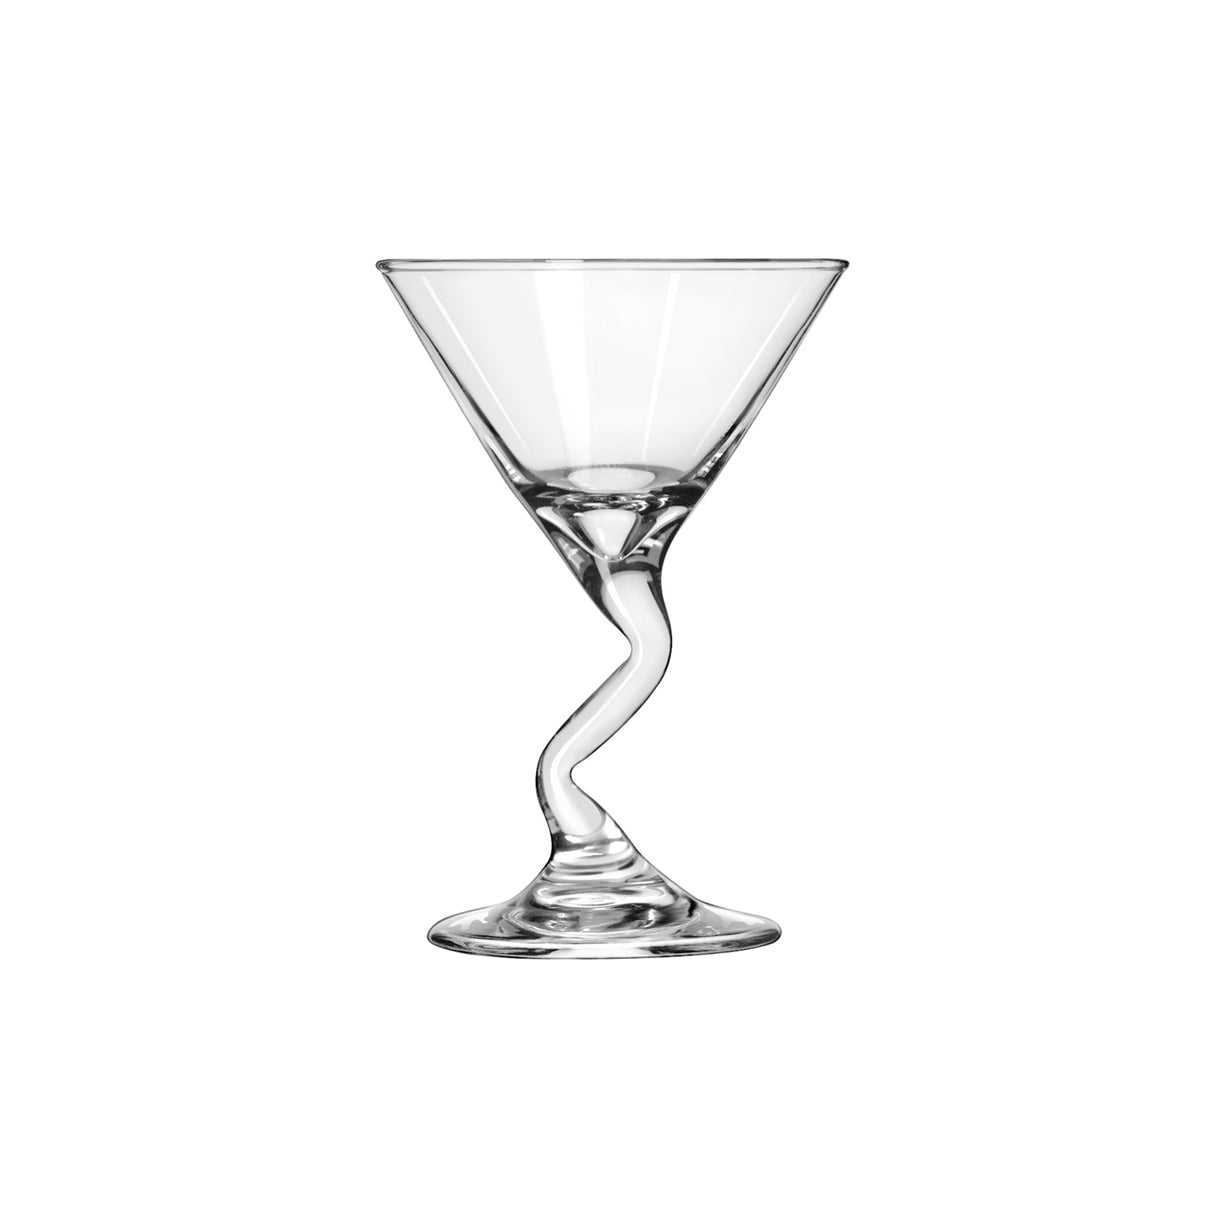 Z Stem Martini - 148 ml from Libbey. made out of Glass and sold in boxes of 12. Hospitality quality at wholesale price with The Flying Fork! 